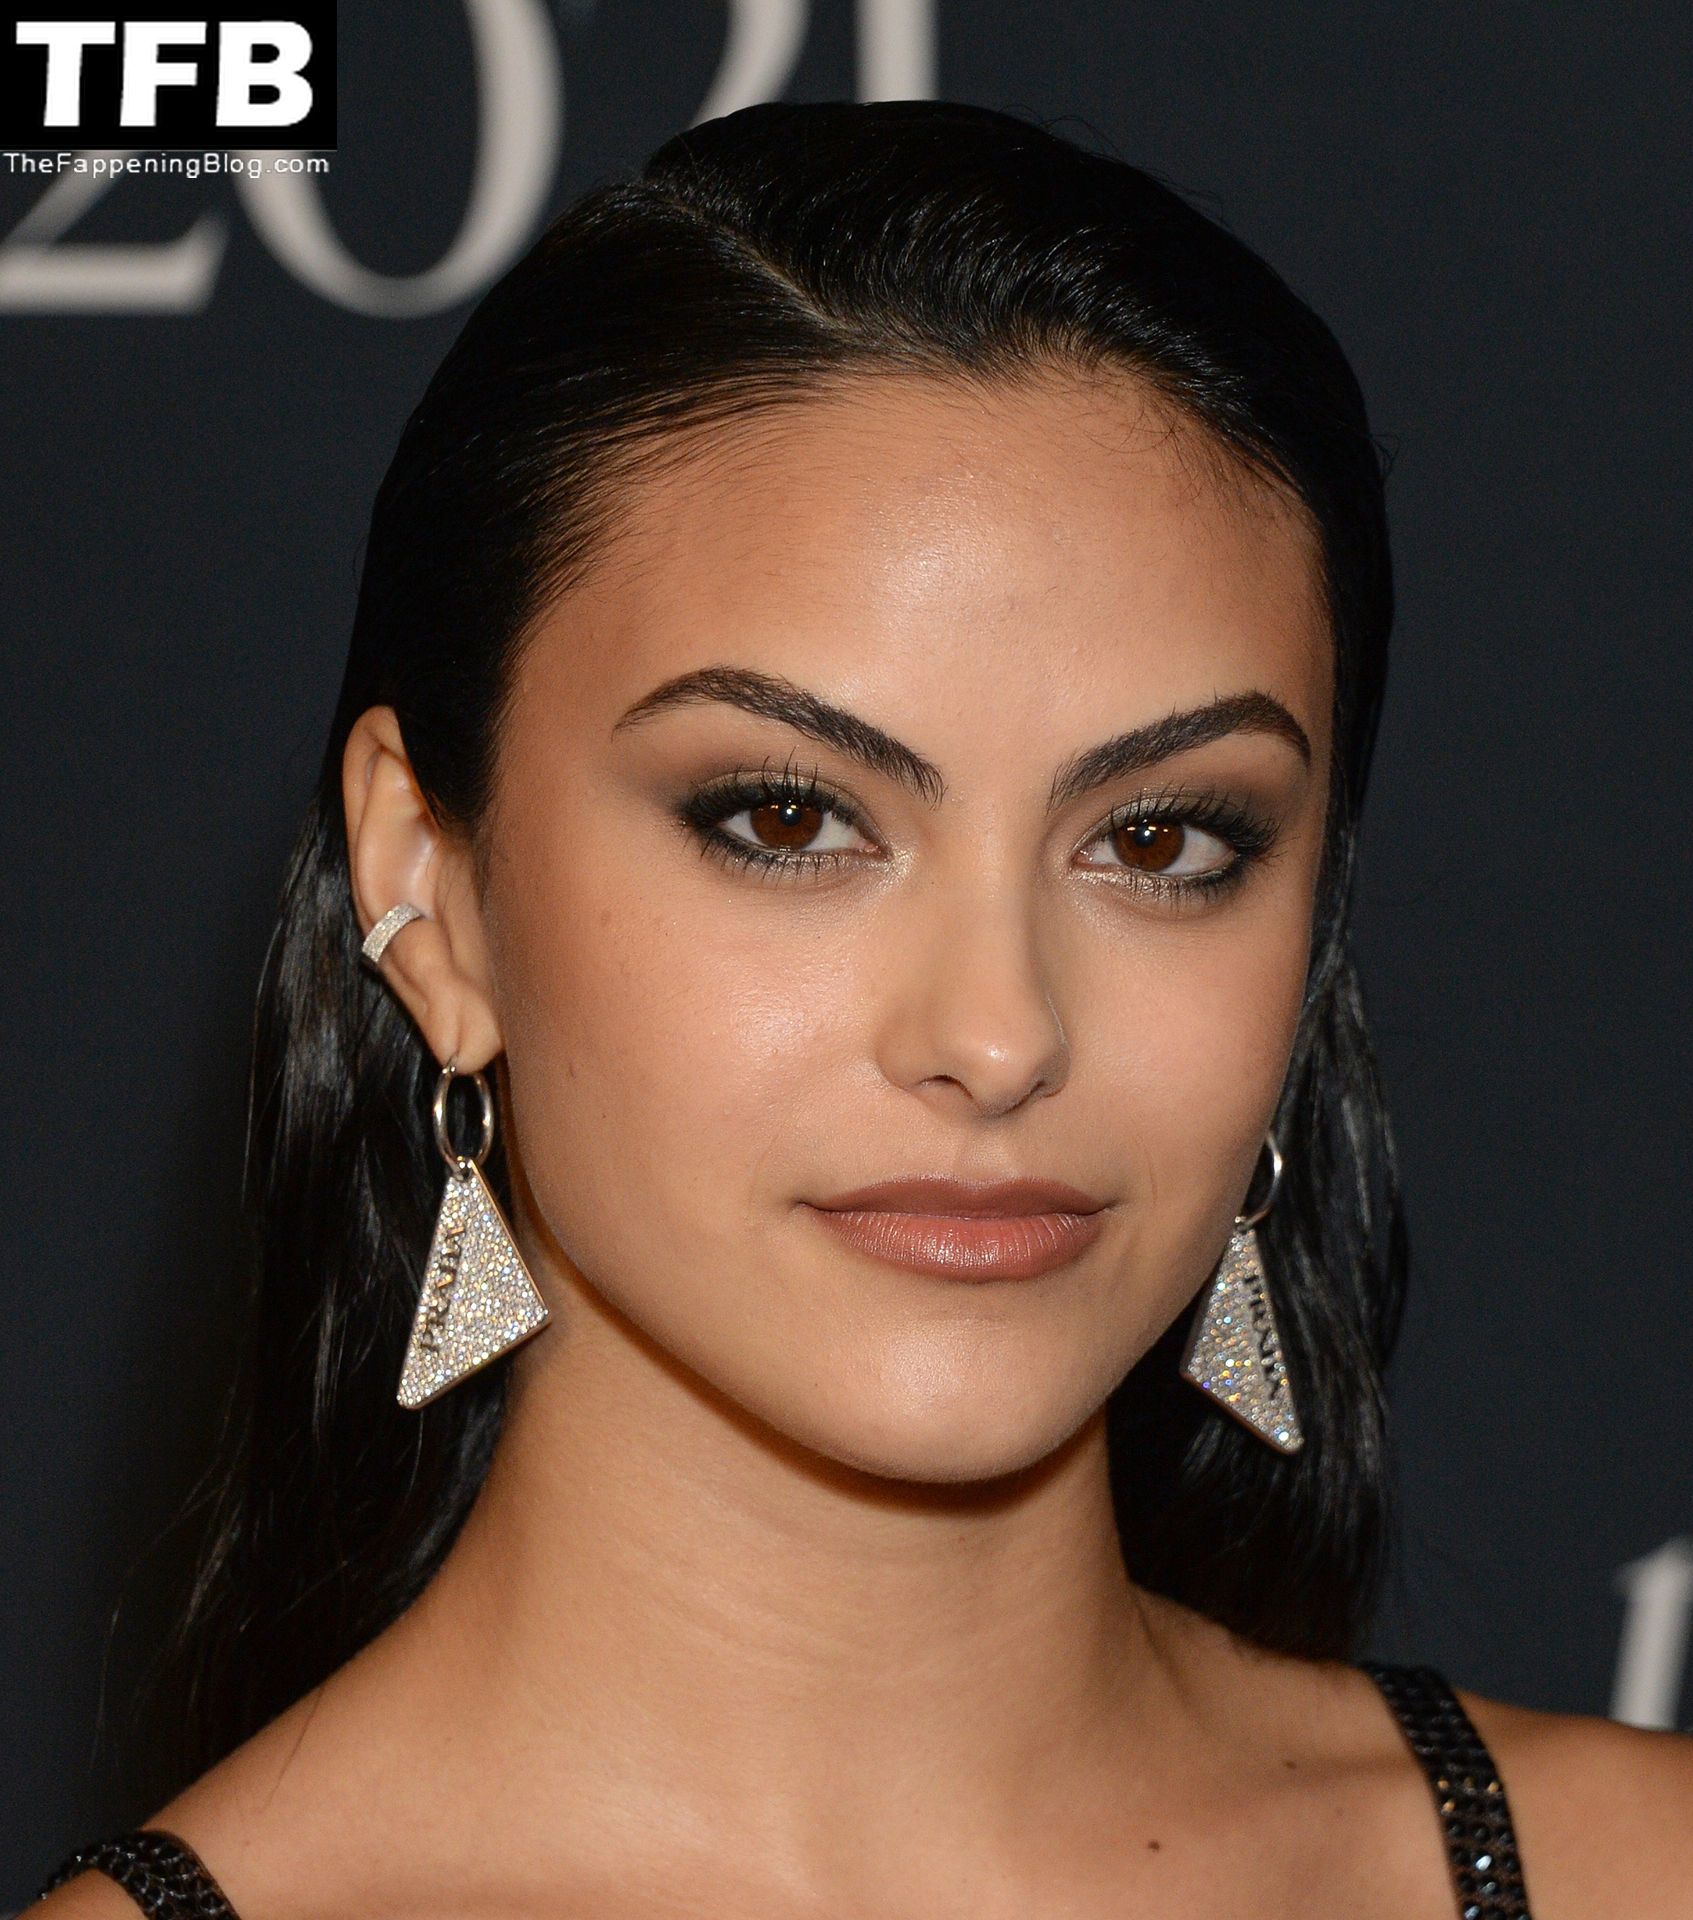 Camila-Mendes-See-Through-Tits-The-Fappening-Blog-70.jpg